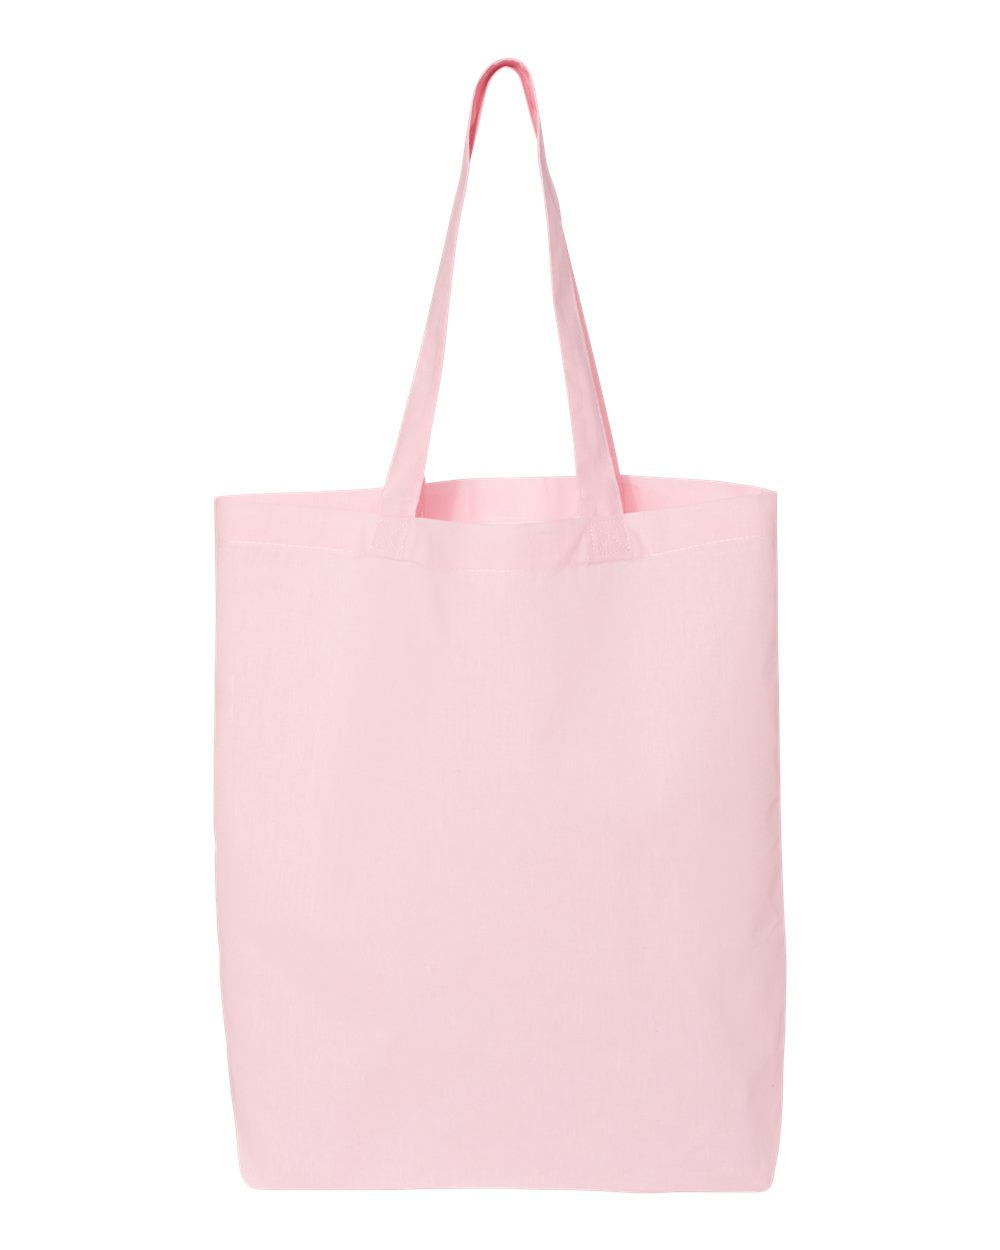 Canvas Tote Bags - 1 Color Print 25 / Light Pink